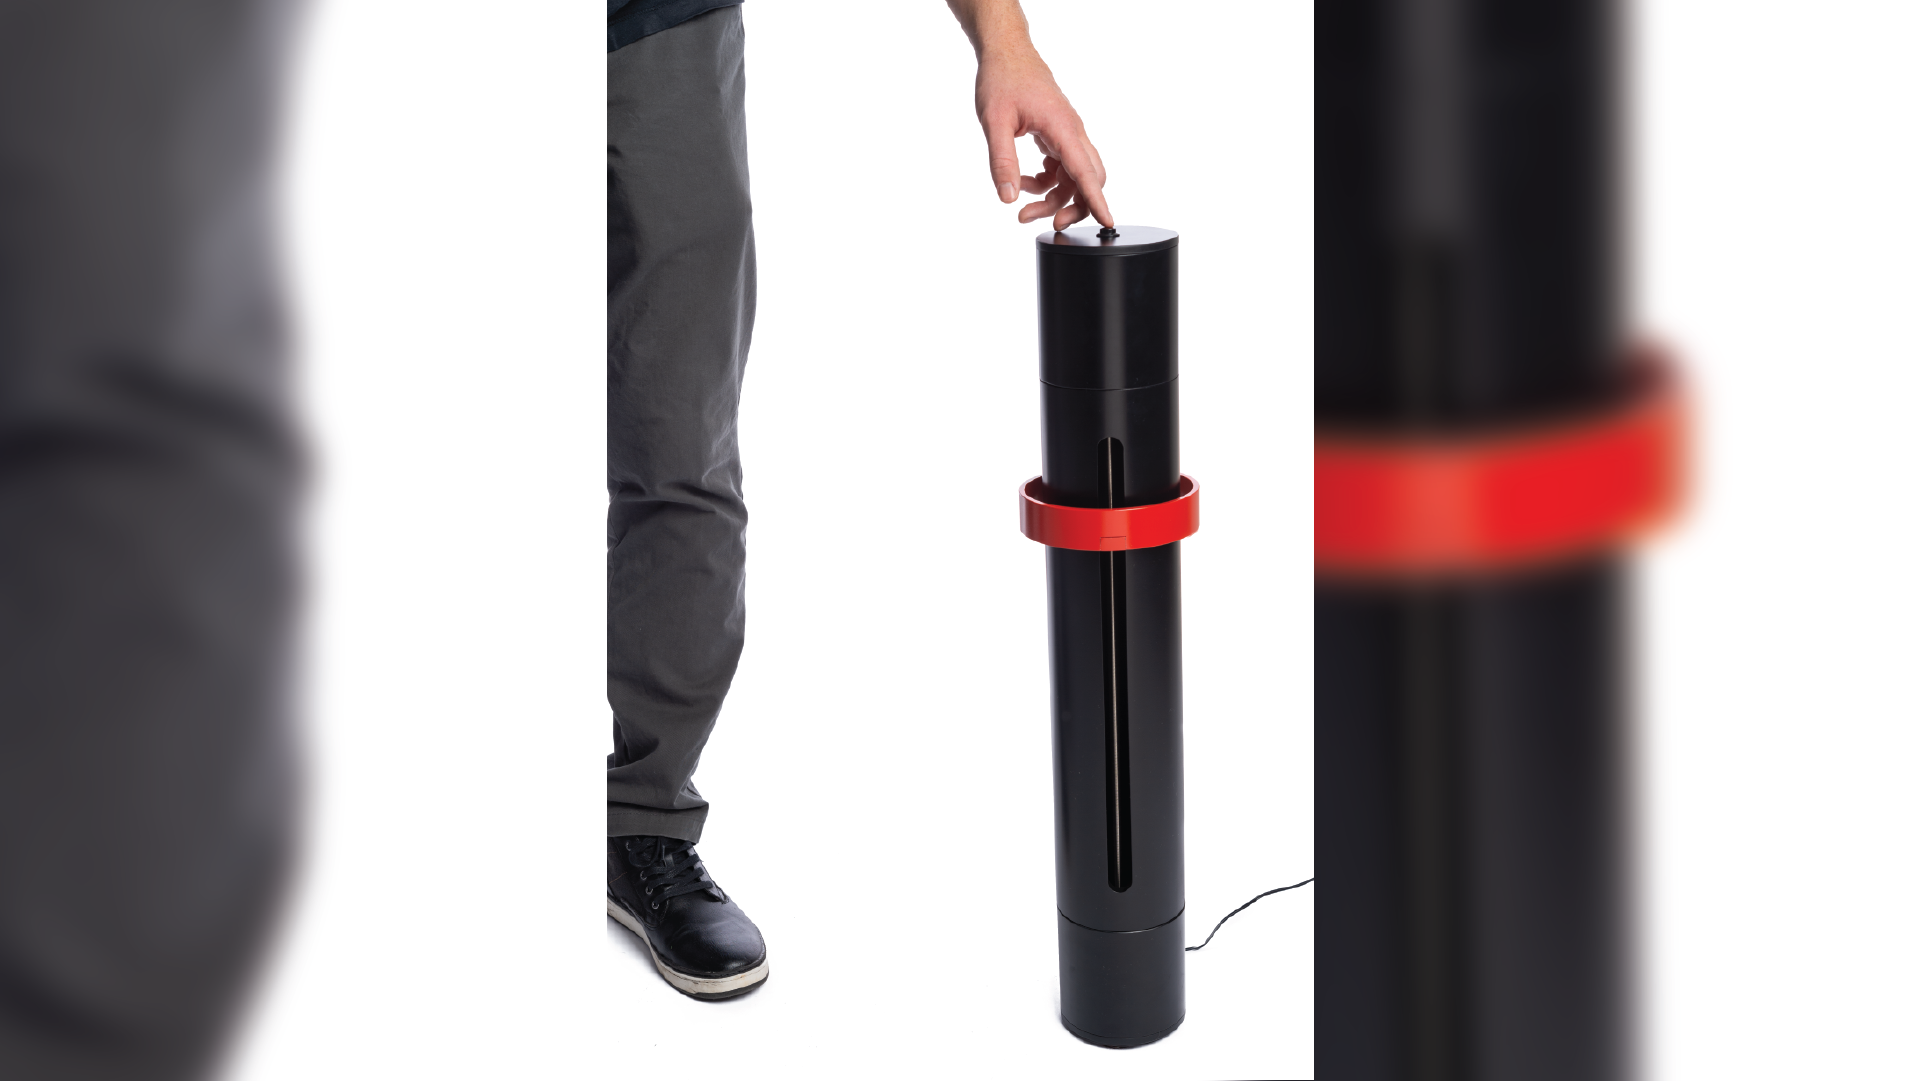 Person standing up right by the clock in a black cylindrical shape with a red ring on it. The person is touching the clock on the top.